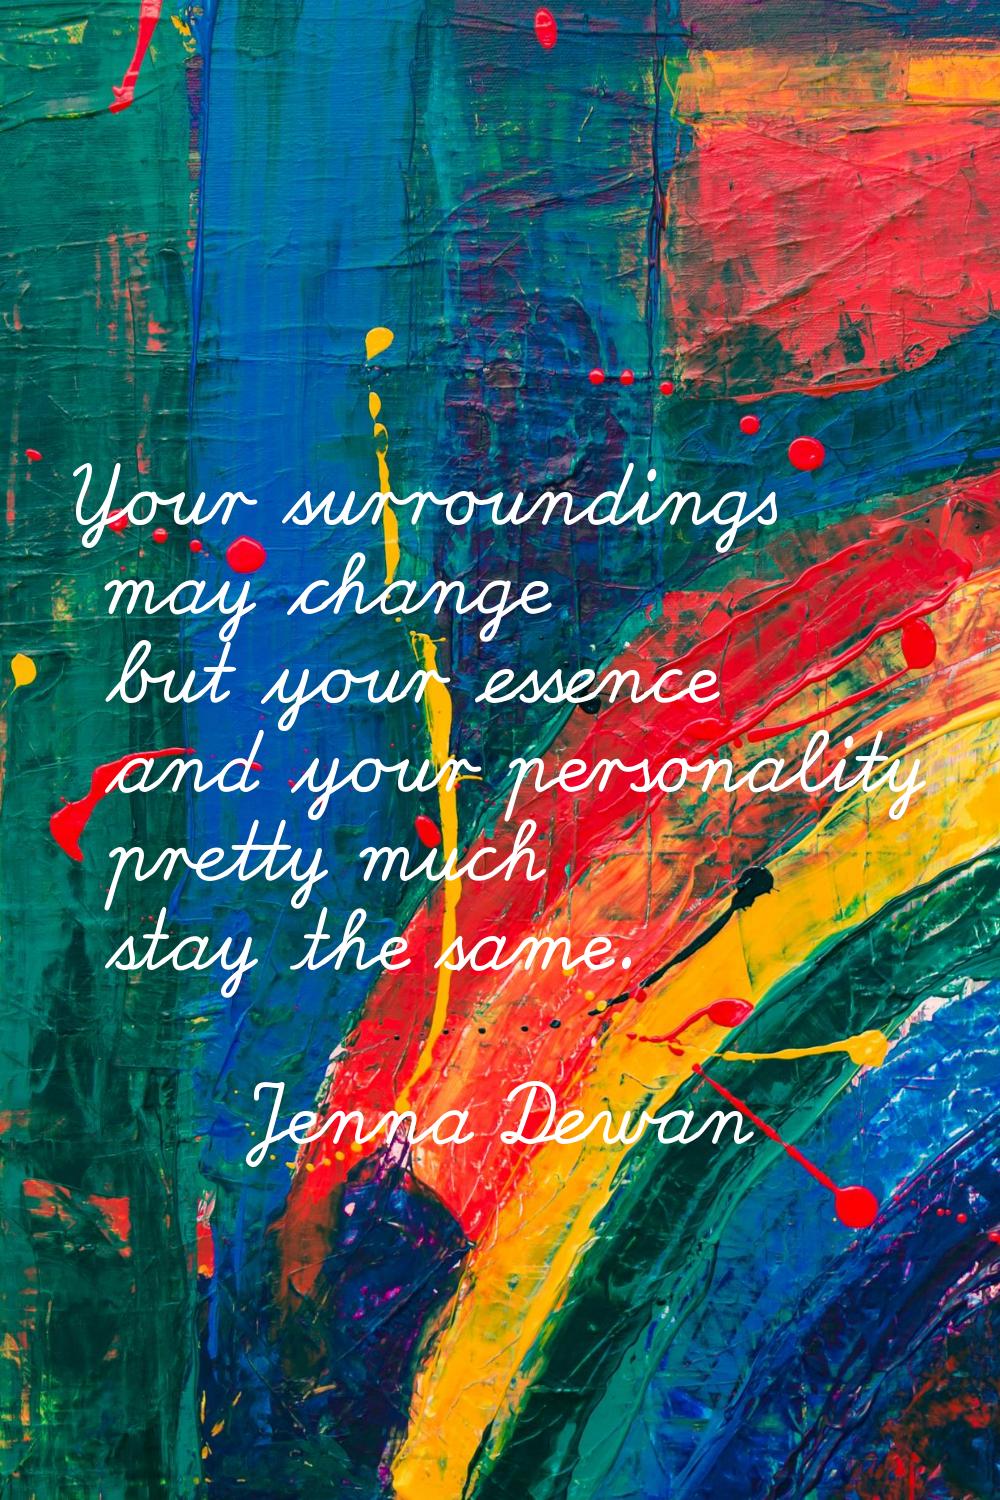 Your surroundings may change but your essence and your personality pretty much stay the same.